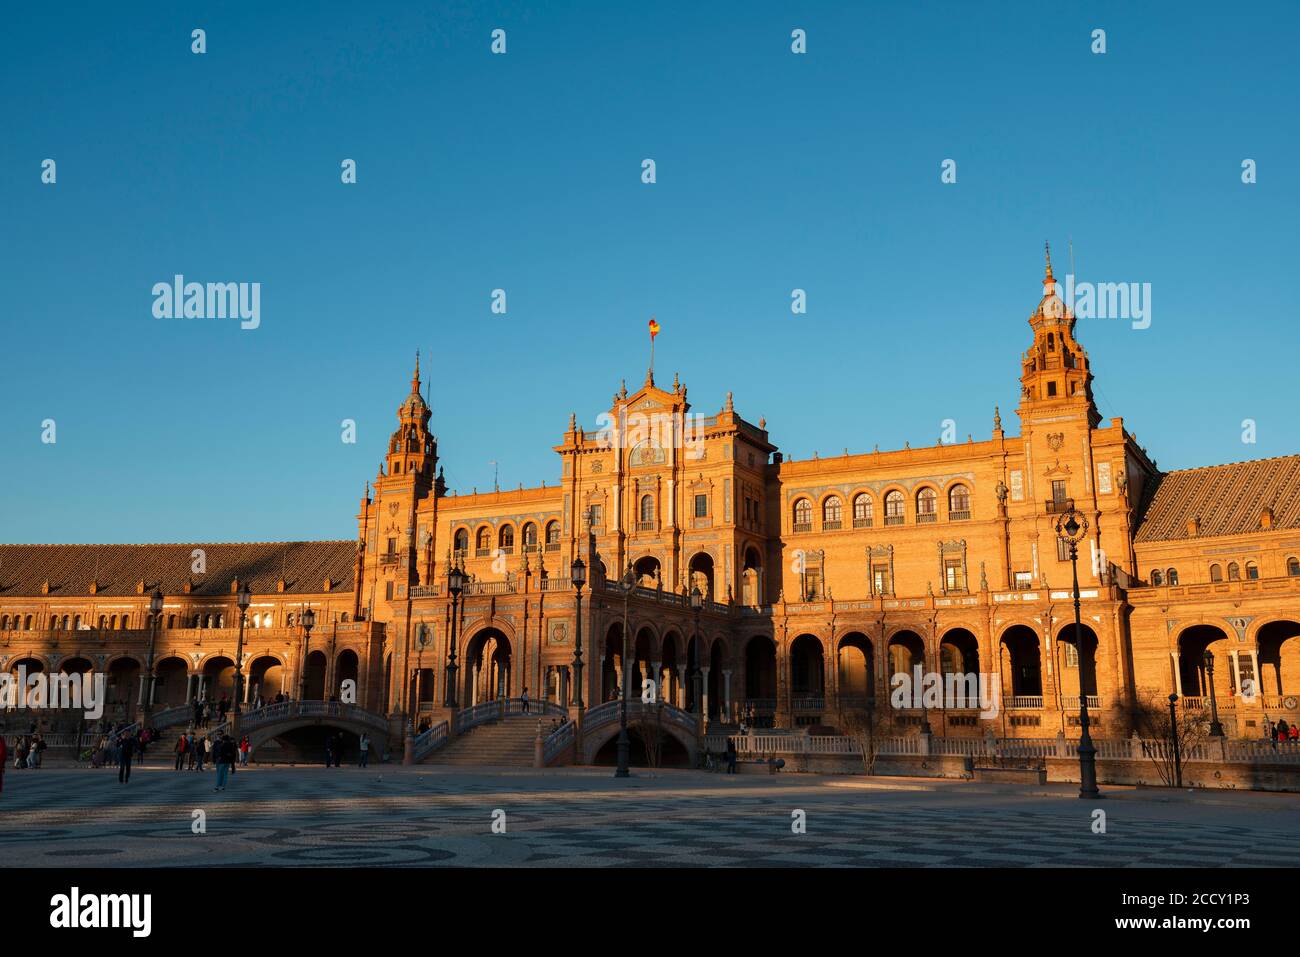 Main building at Plaza de Espana in the evening light, sunset, Sevilla, Andalusia, Spain Stock Photo